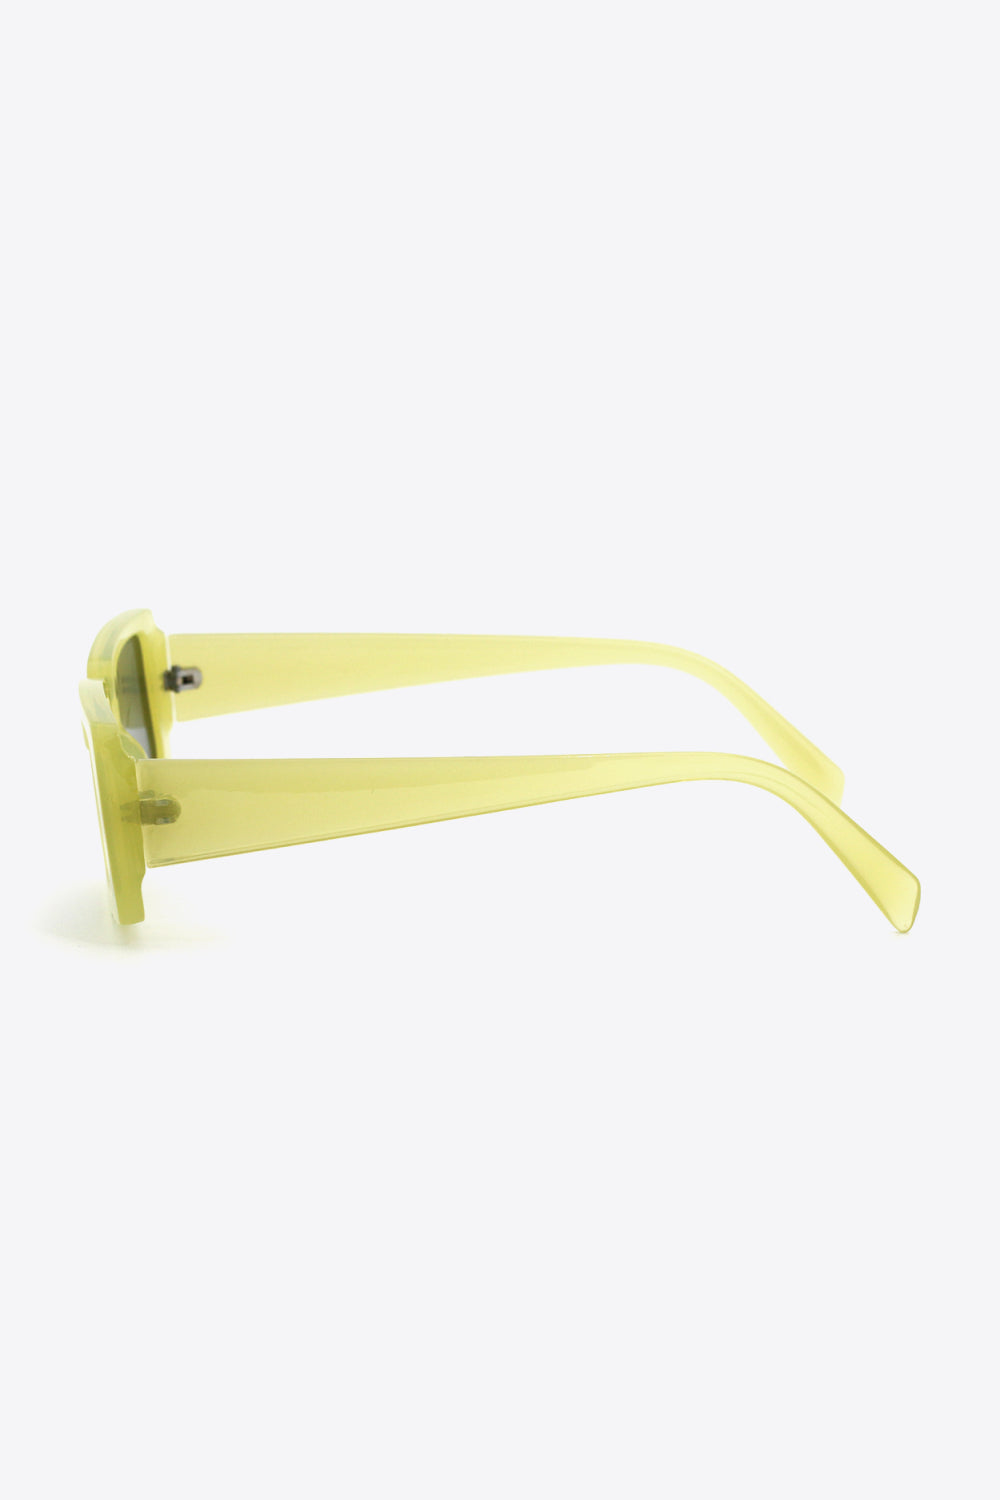 UV400 Polycarbonate Rectangle Sunglasses - Online Only